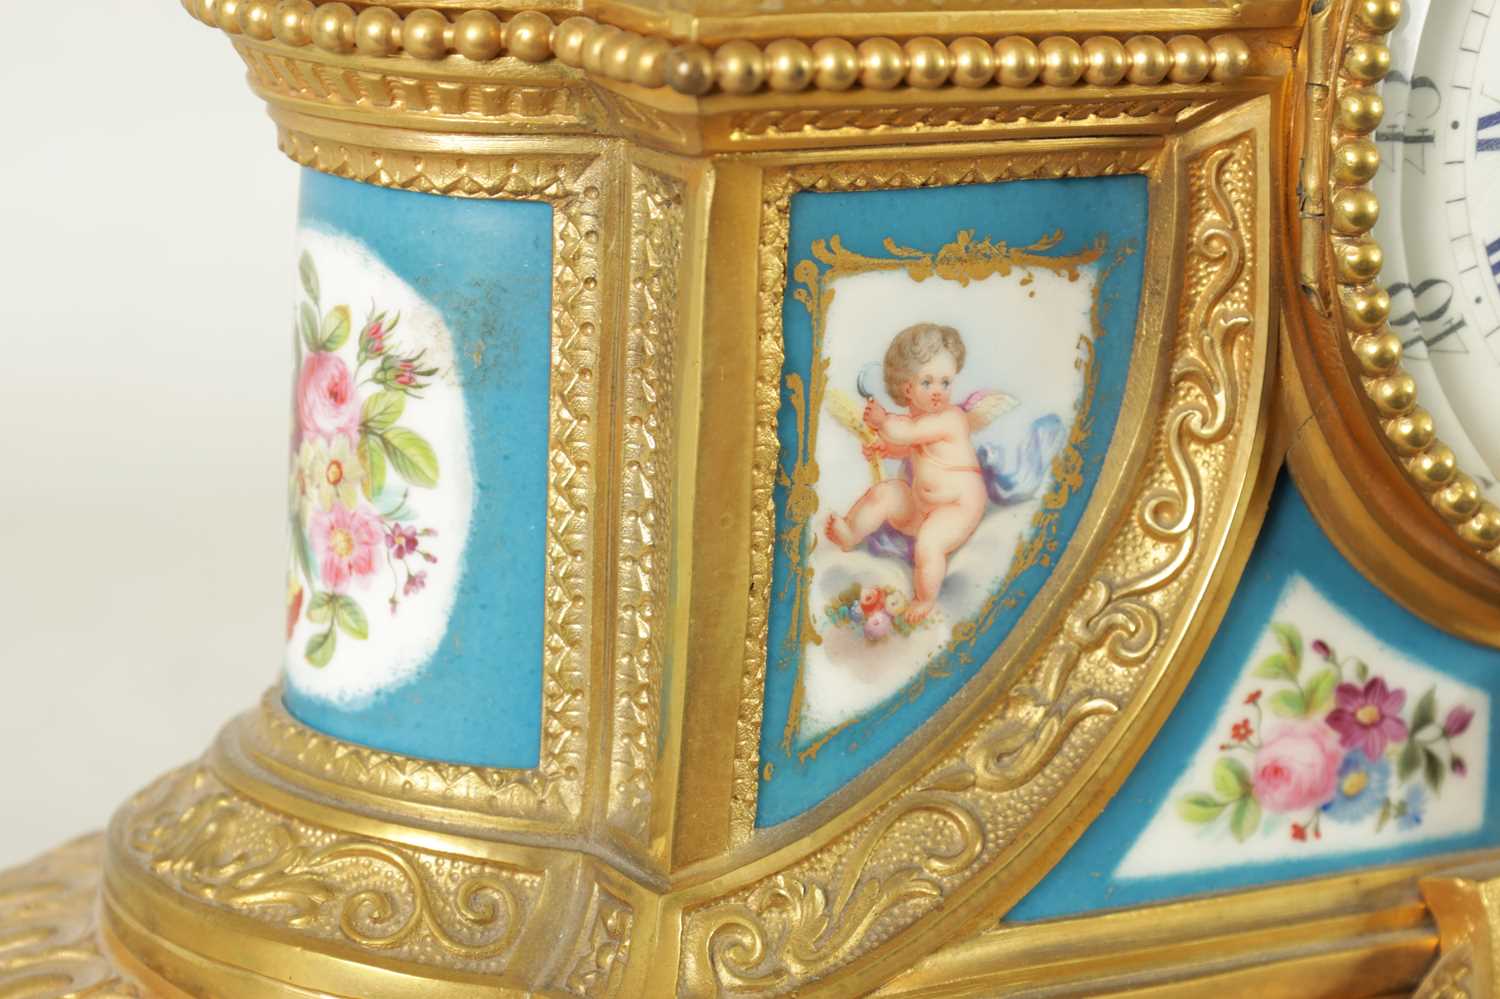 CHARLES OUDIN, A PARIS. A LATE 19TH CENTURY FRENCH ORMOLU AND PORCELAIN PANELLED MANTEL CLOCK - Image 5 of 11